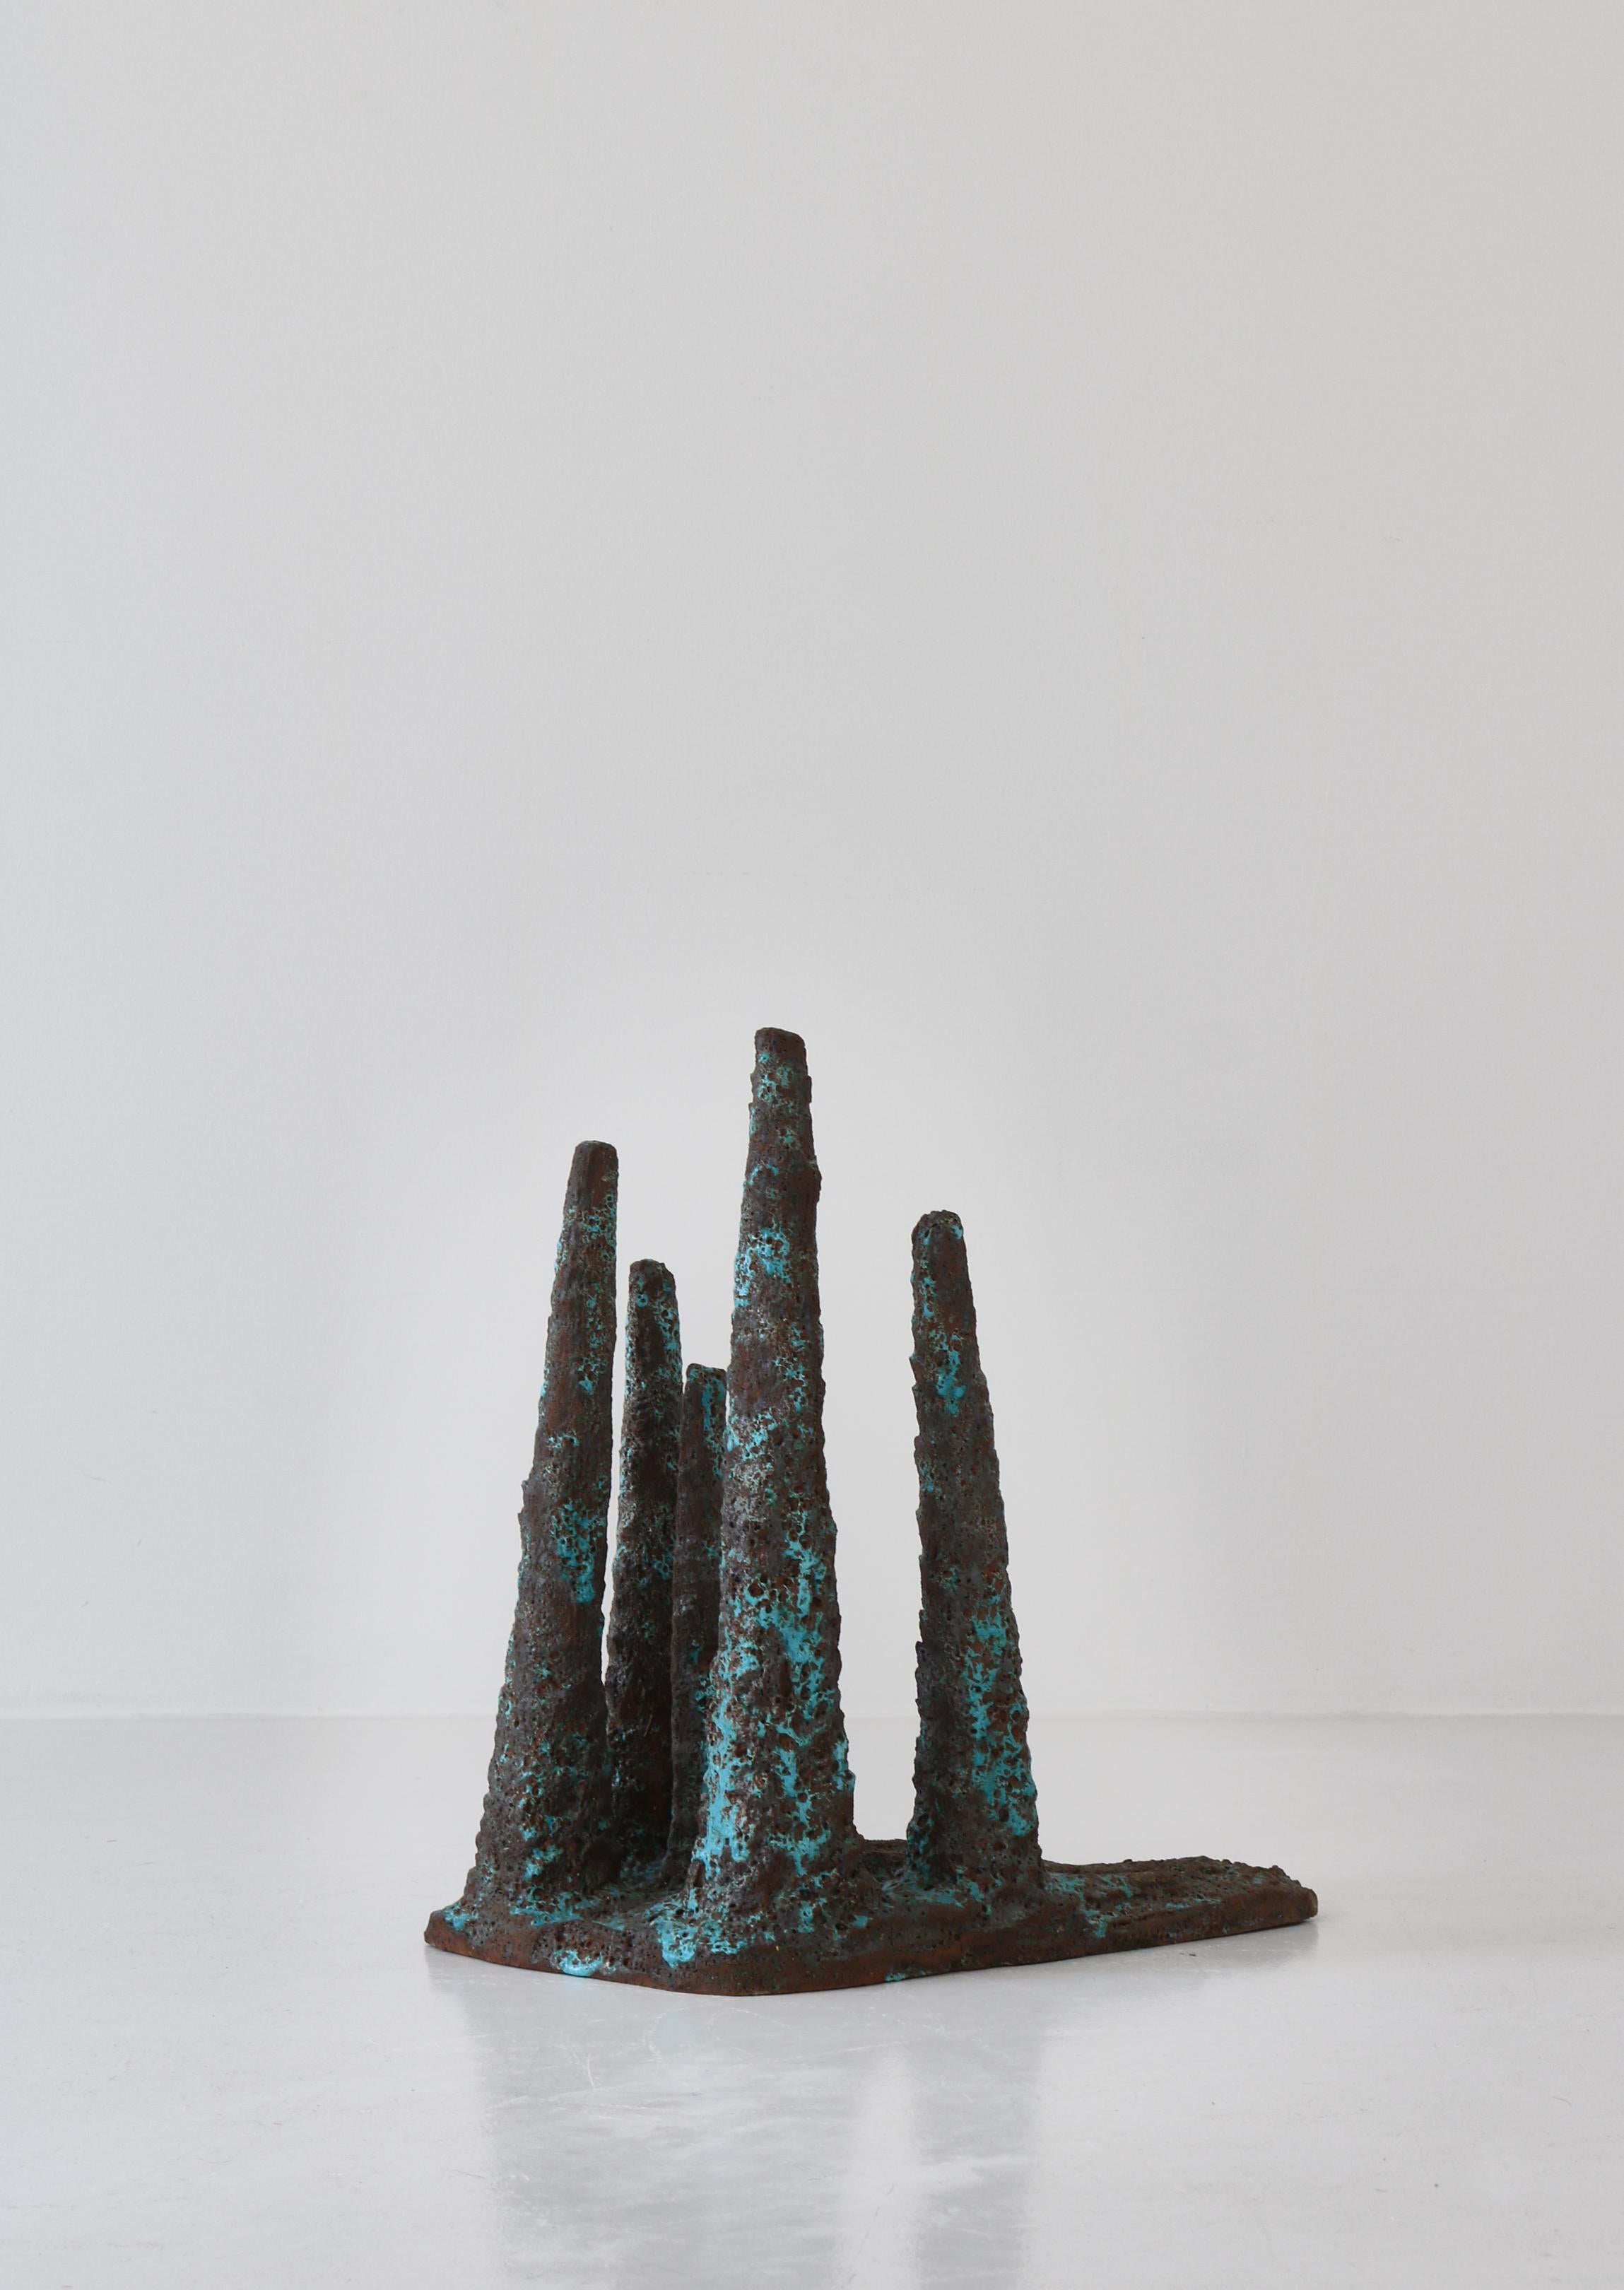 Unique large floor sculpture by Danish artist Ole Bjørn Krüger (1922-2007) made in the 1960s in his own workshop. Abstract stalagmite columns hand sculpted in dark stoneware with a shiny blue glazing. Krüger was known for a very expressive style of